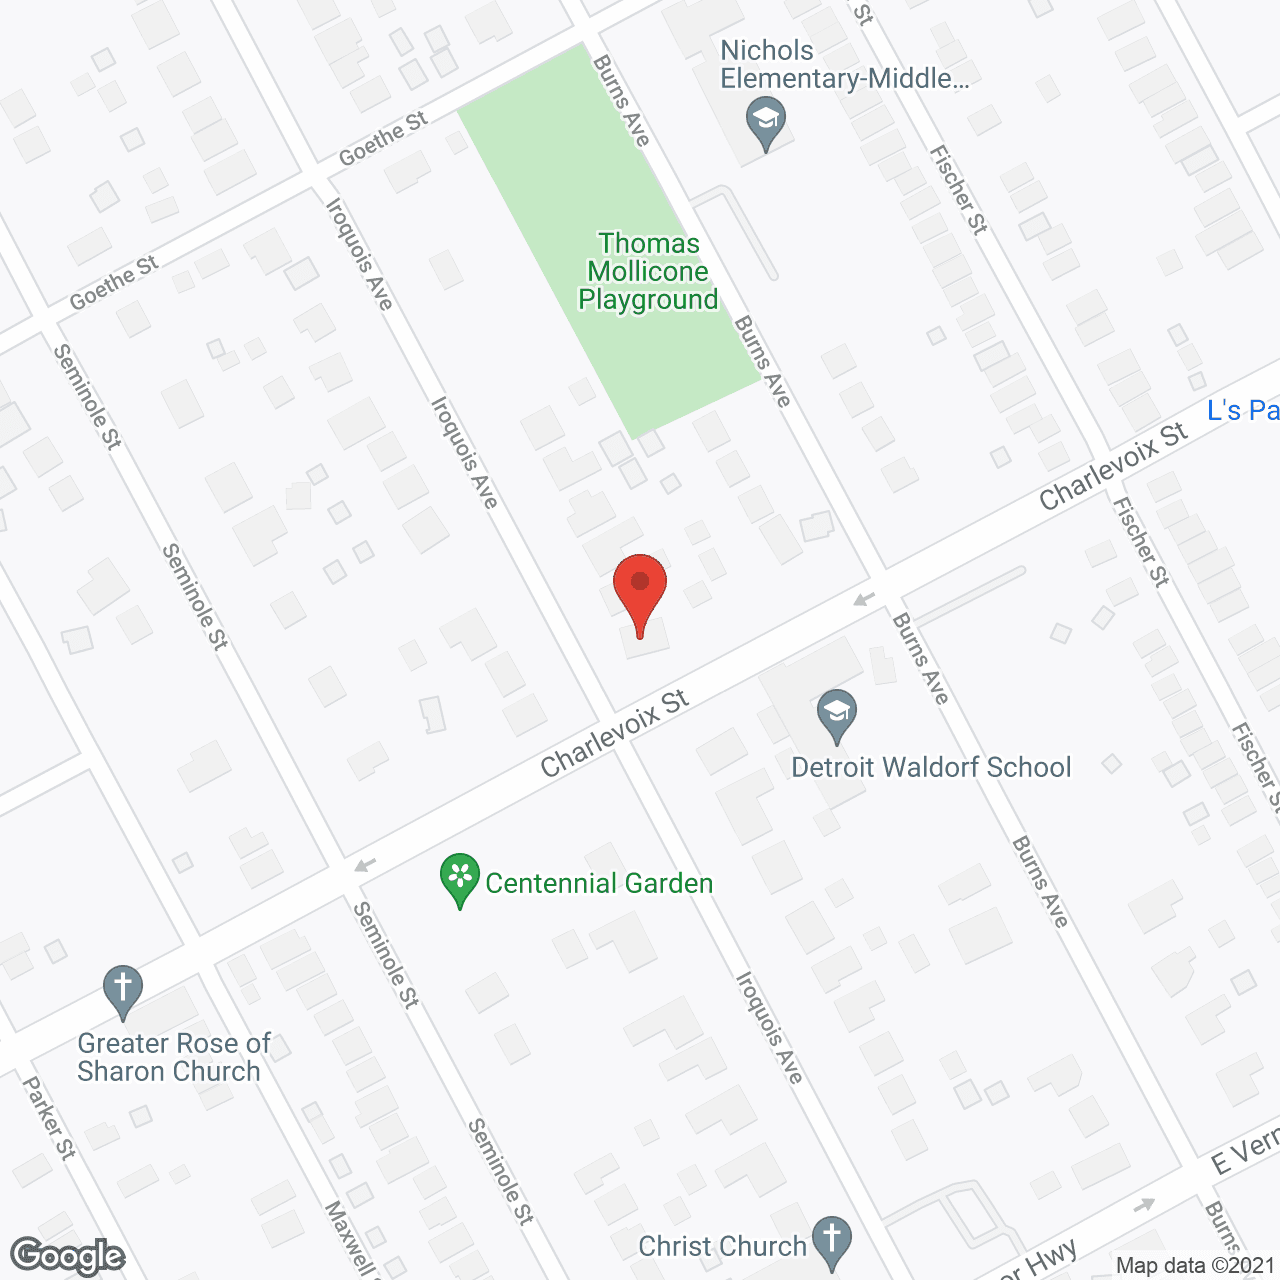 Whittier Towers in google map